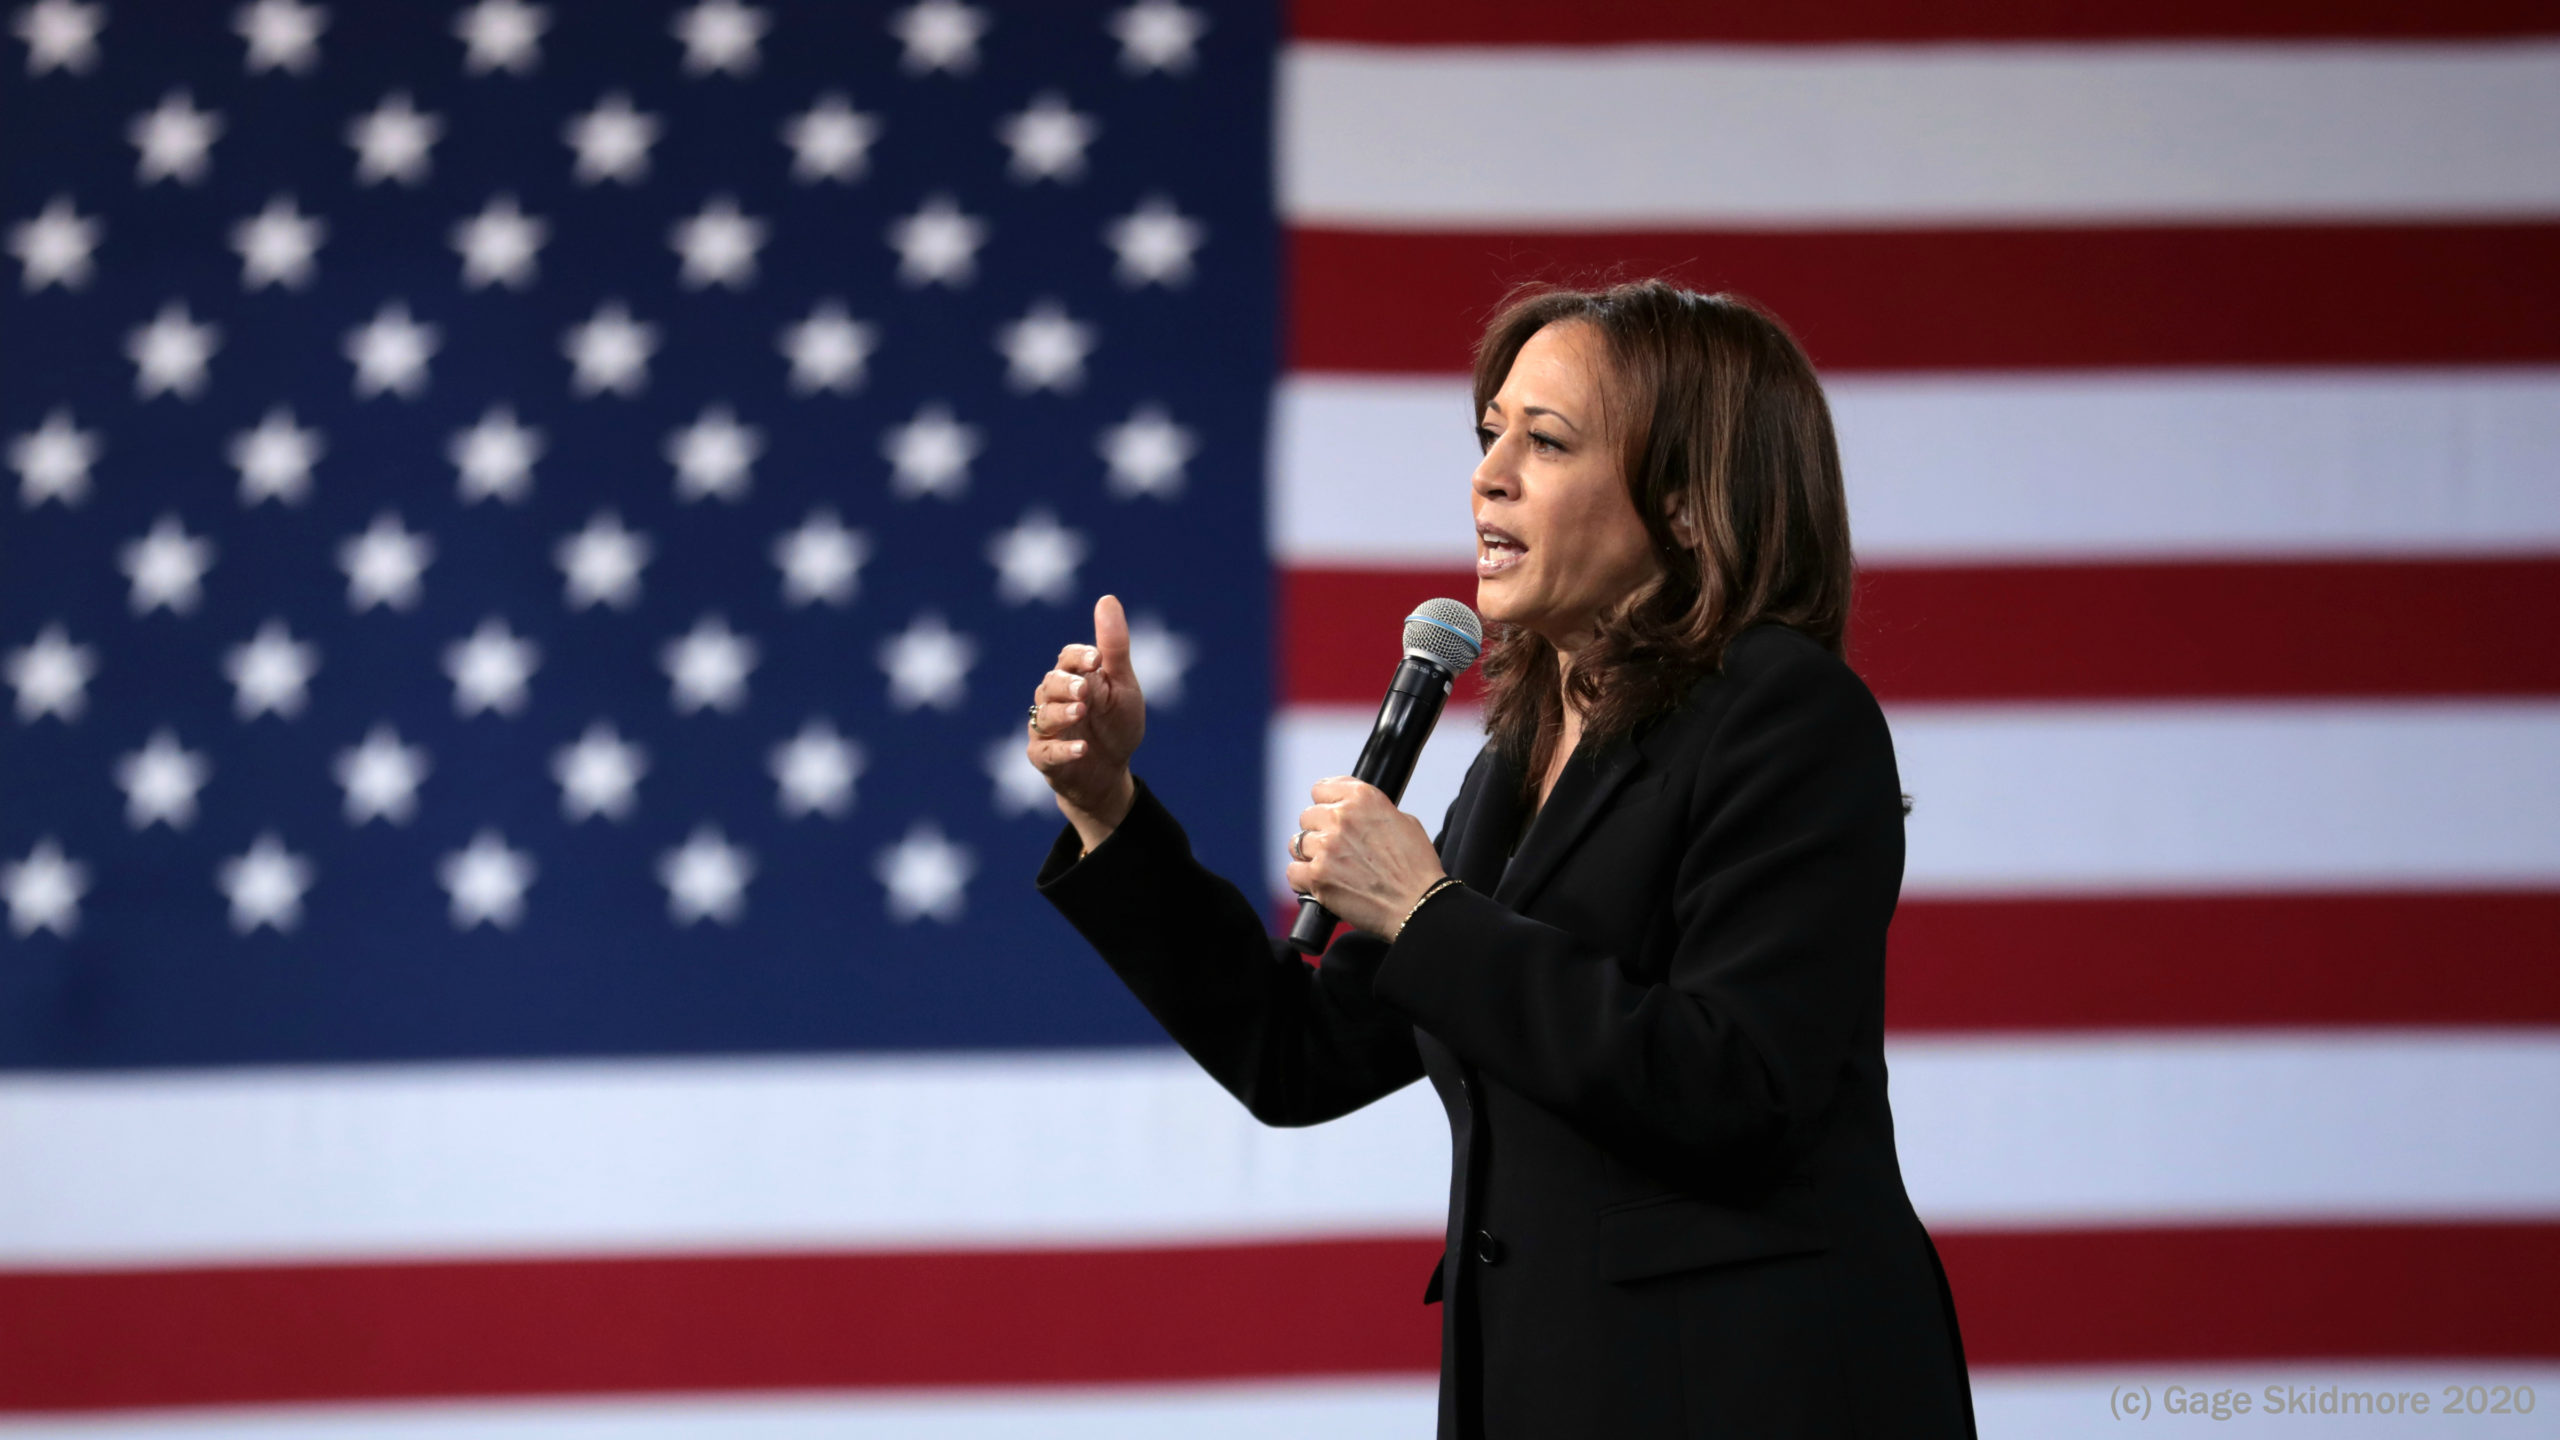 Independent Women’s Voice Leader Pushes Sexist Trope that Kamala Harris Is “Transactional” as Its Women’s Forum Downplays Her Qualifications via Tokenism Claims